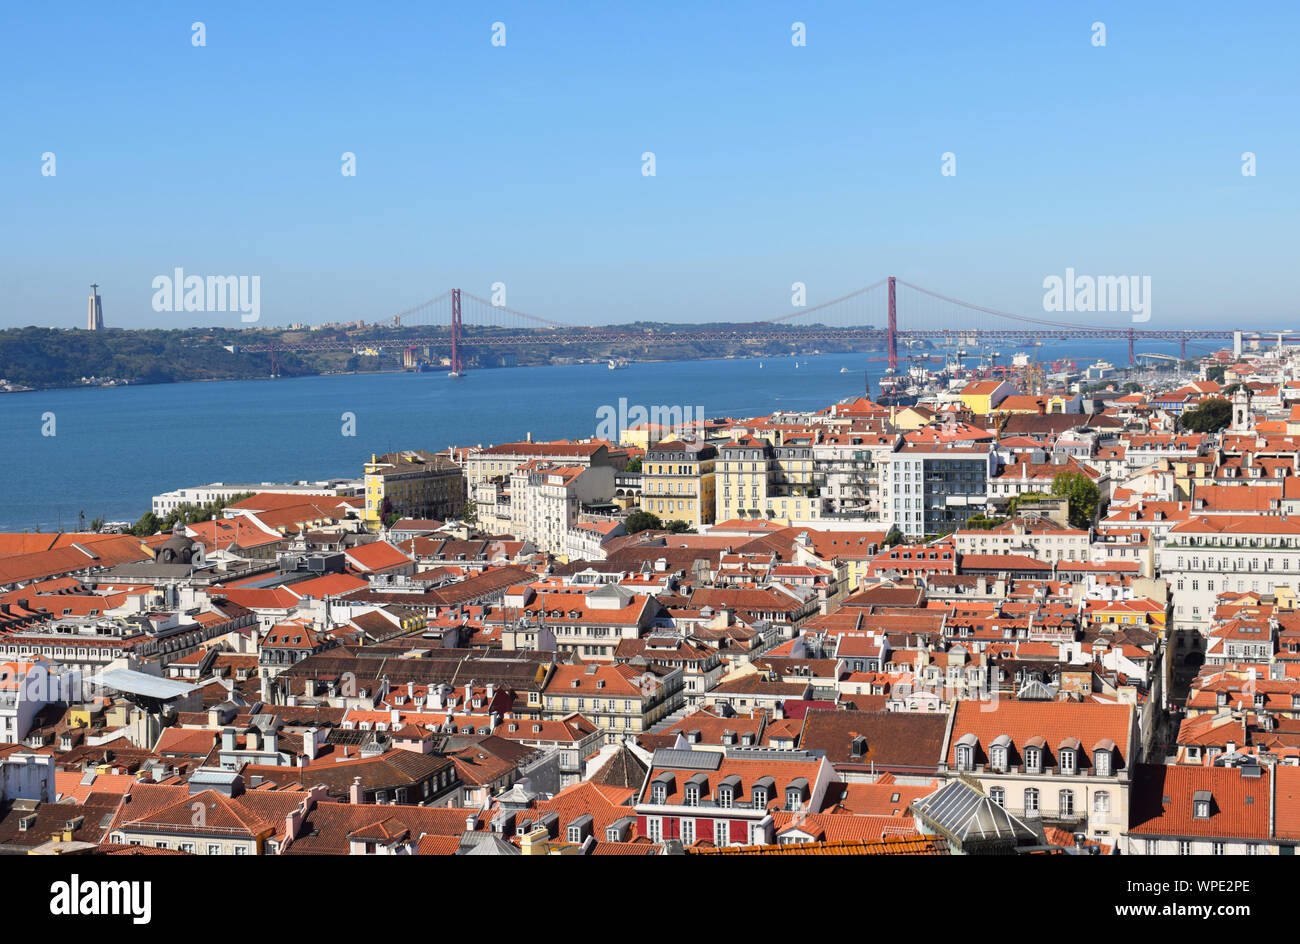 Aerial view of Lisbon Portugal including the River Tagus and River Tagus Bridge Stock Photo